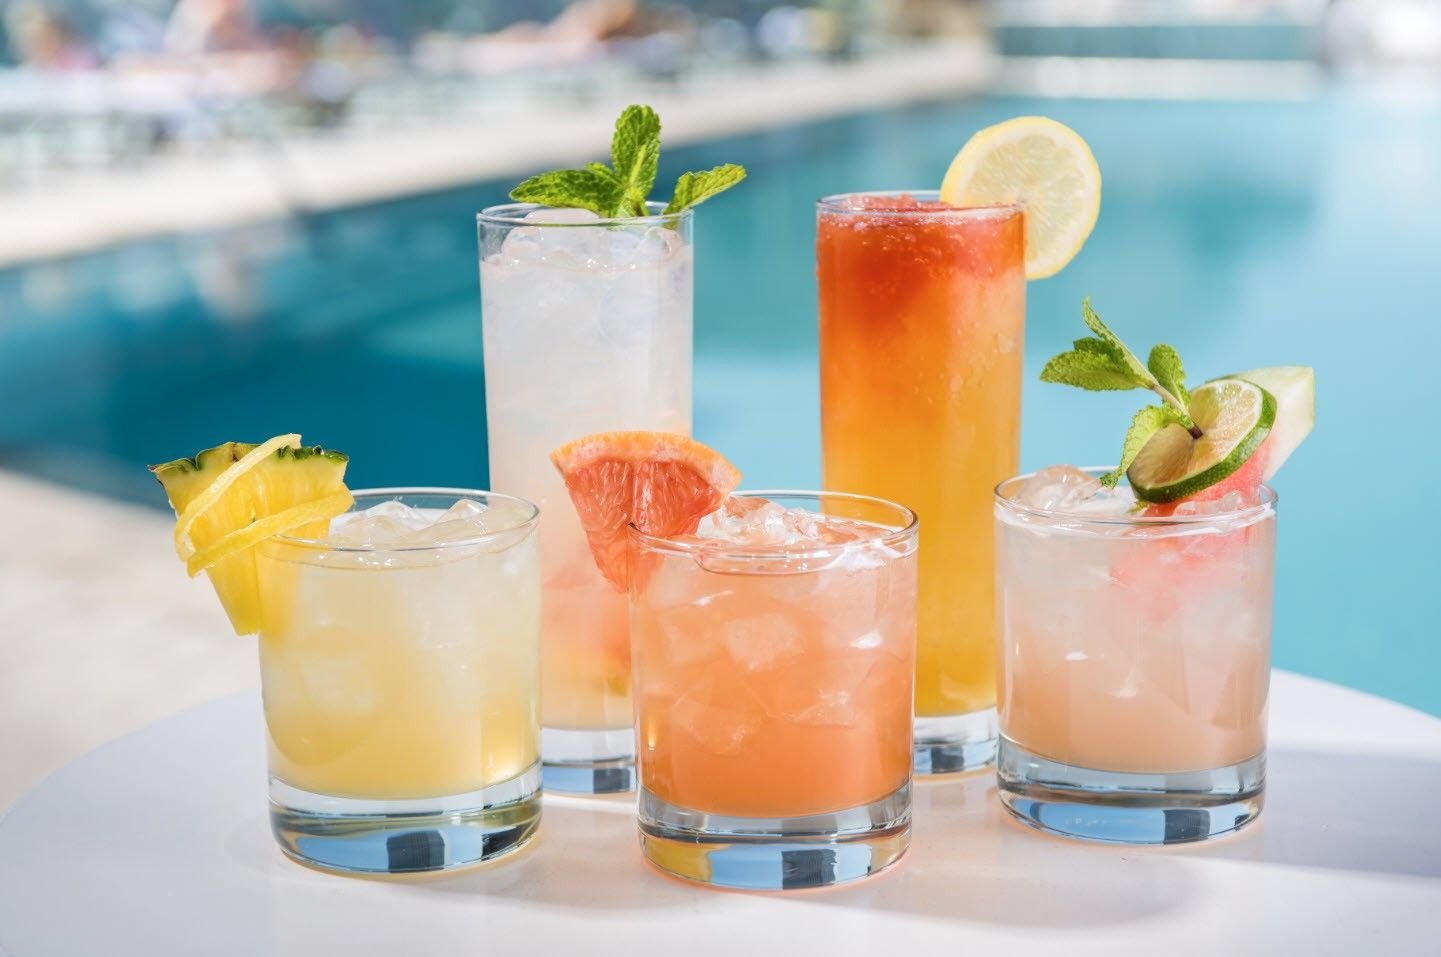 Top 10 cocktails for the perfect garden party in summer